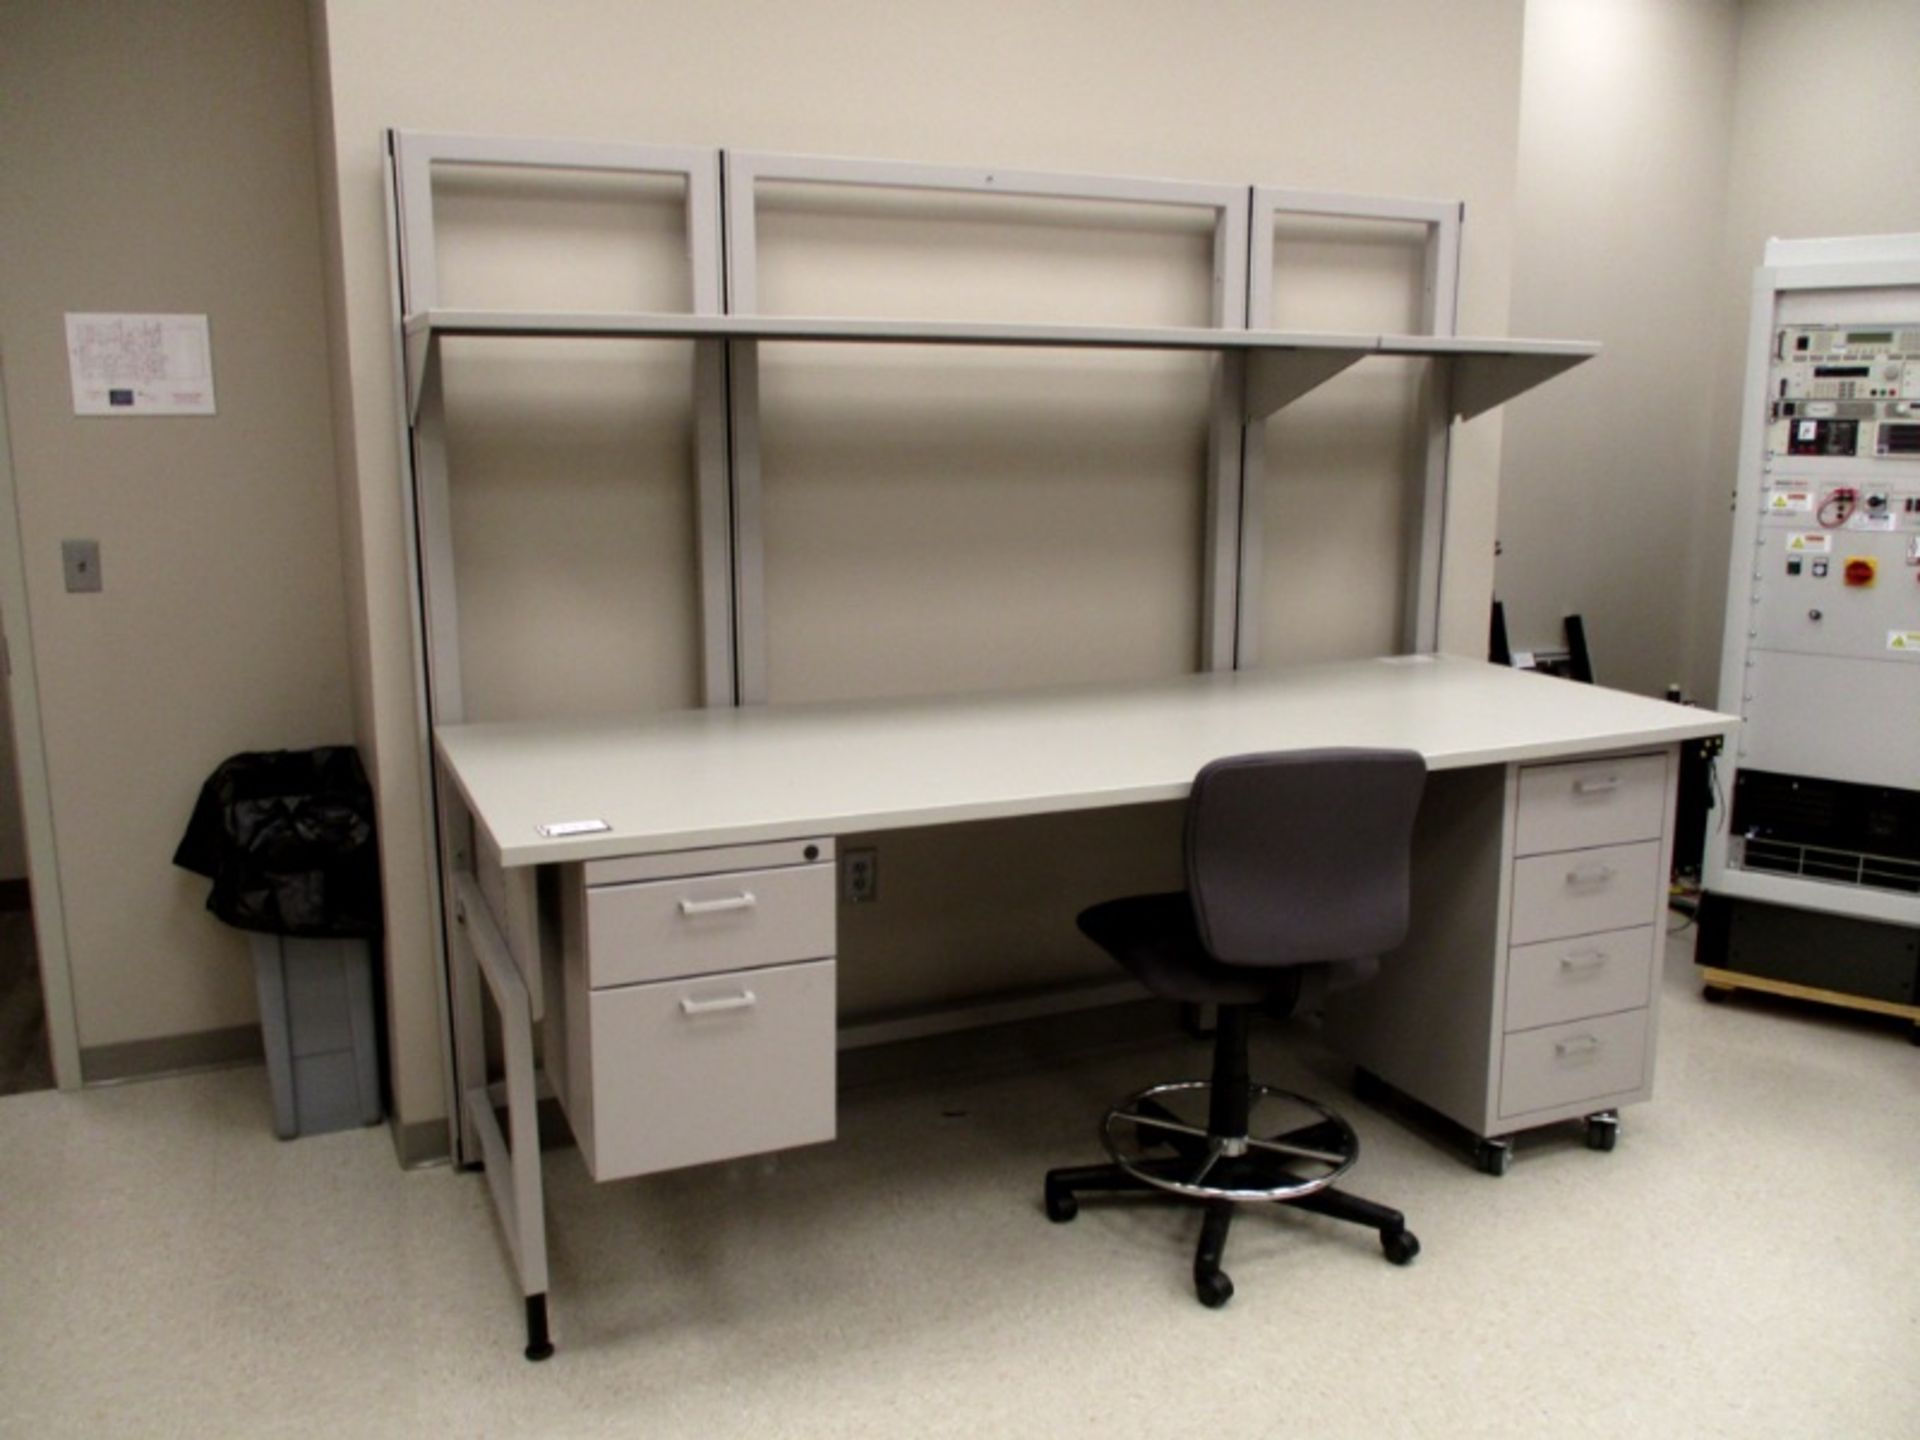 Heavy Duty Lab Dest with (6) Drawers and Shelf, 3' x 8' x 3' work top - Image 2 of 2